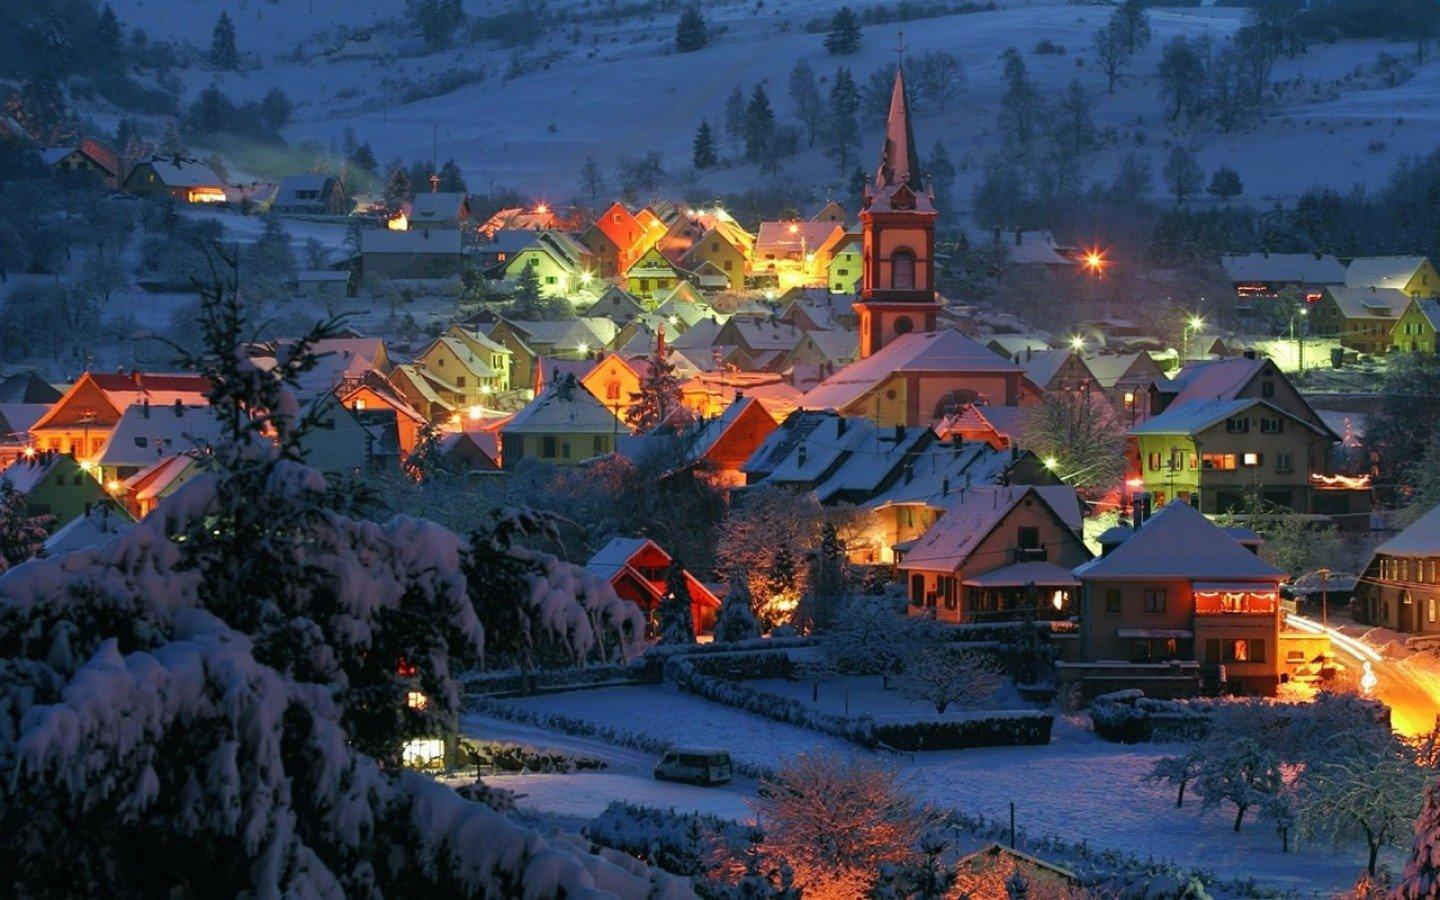 Lighted Village on a Winter Evening Wallpaper and Background